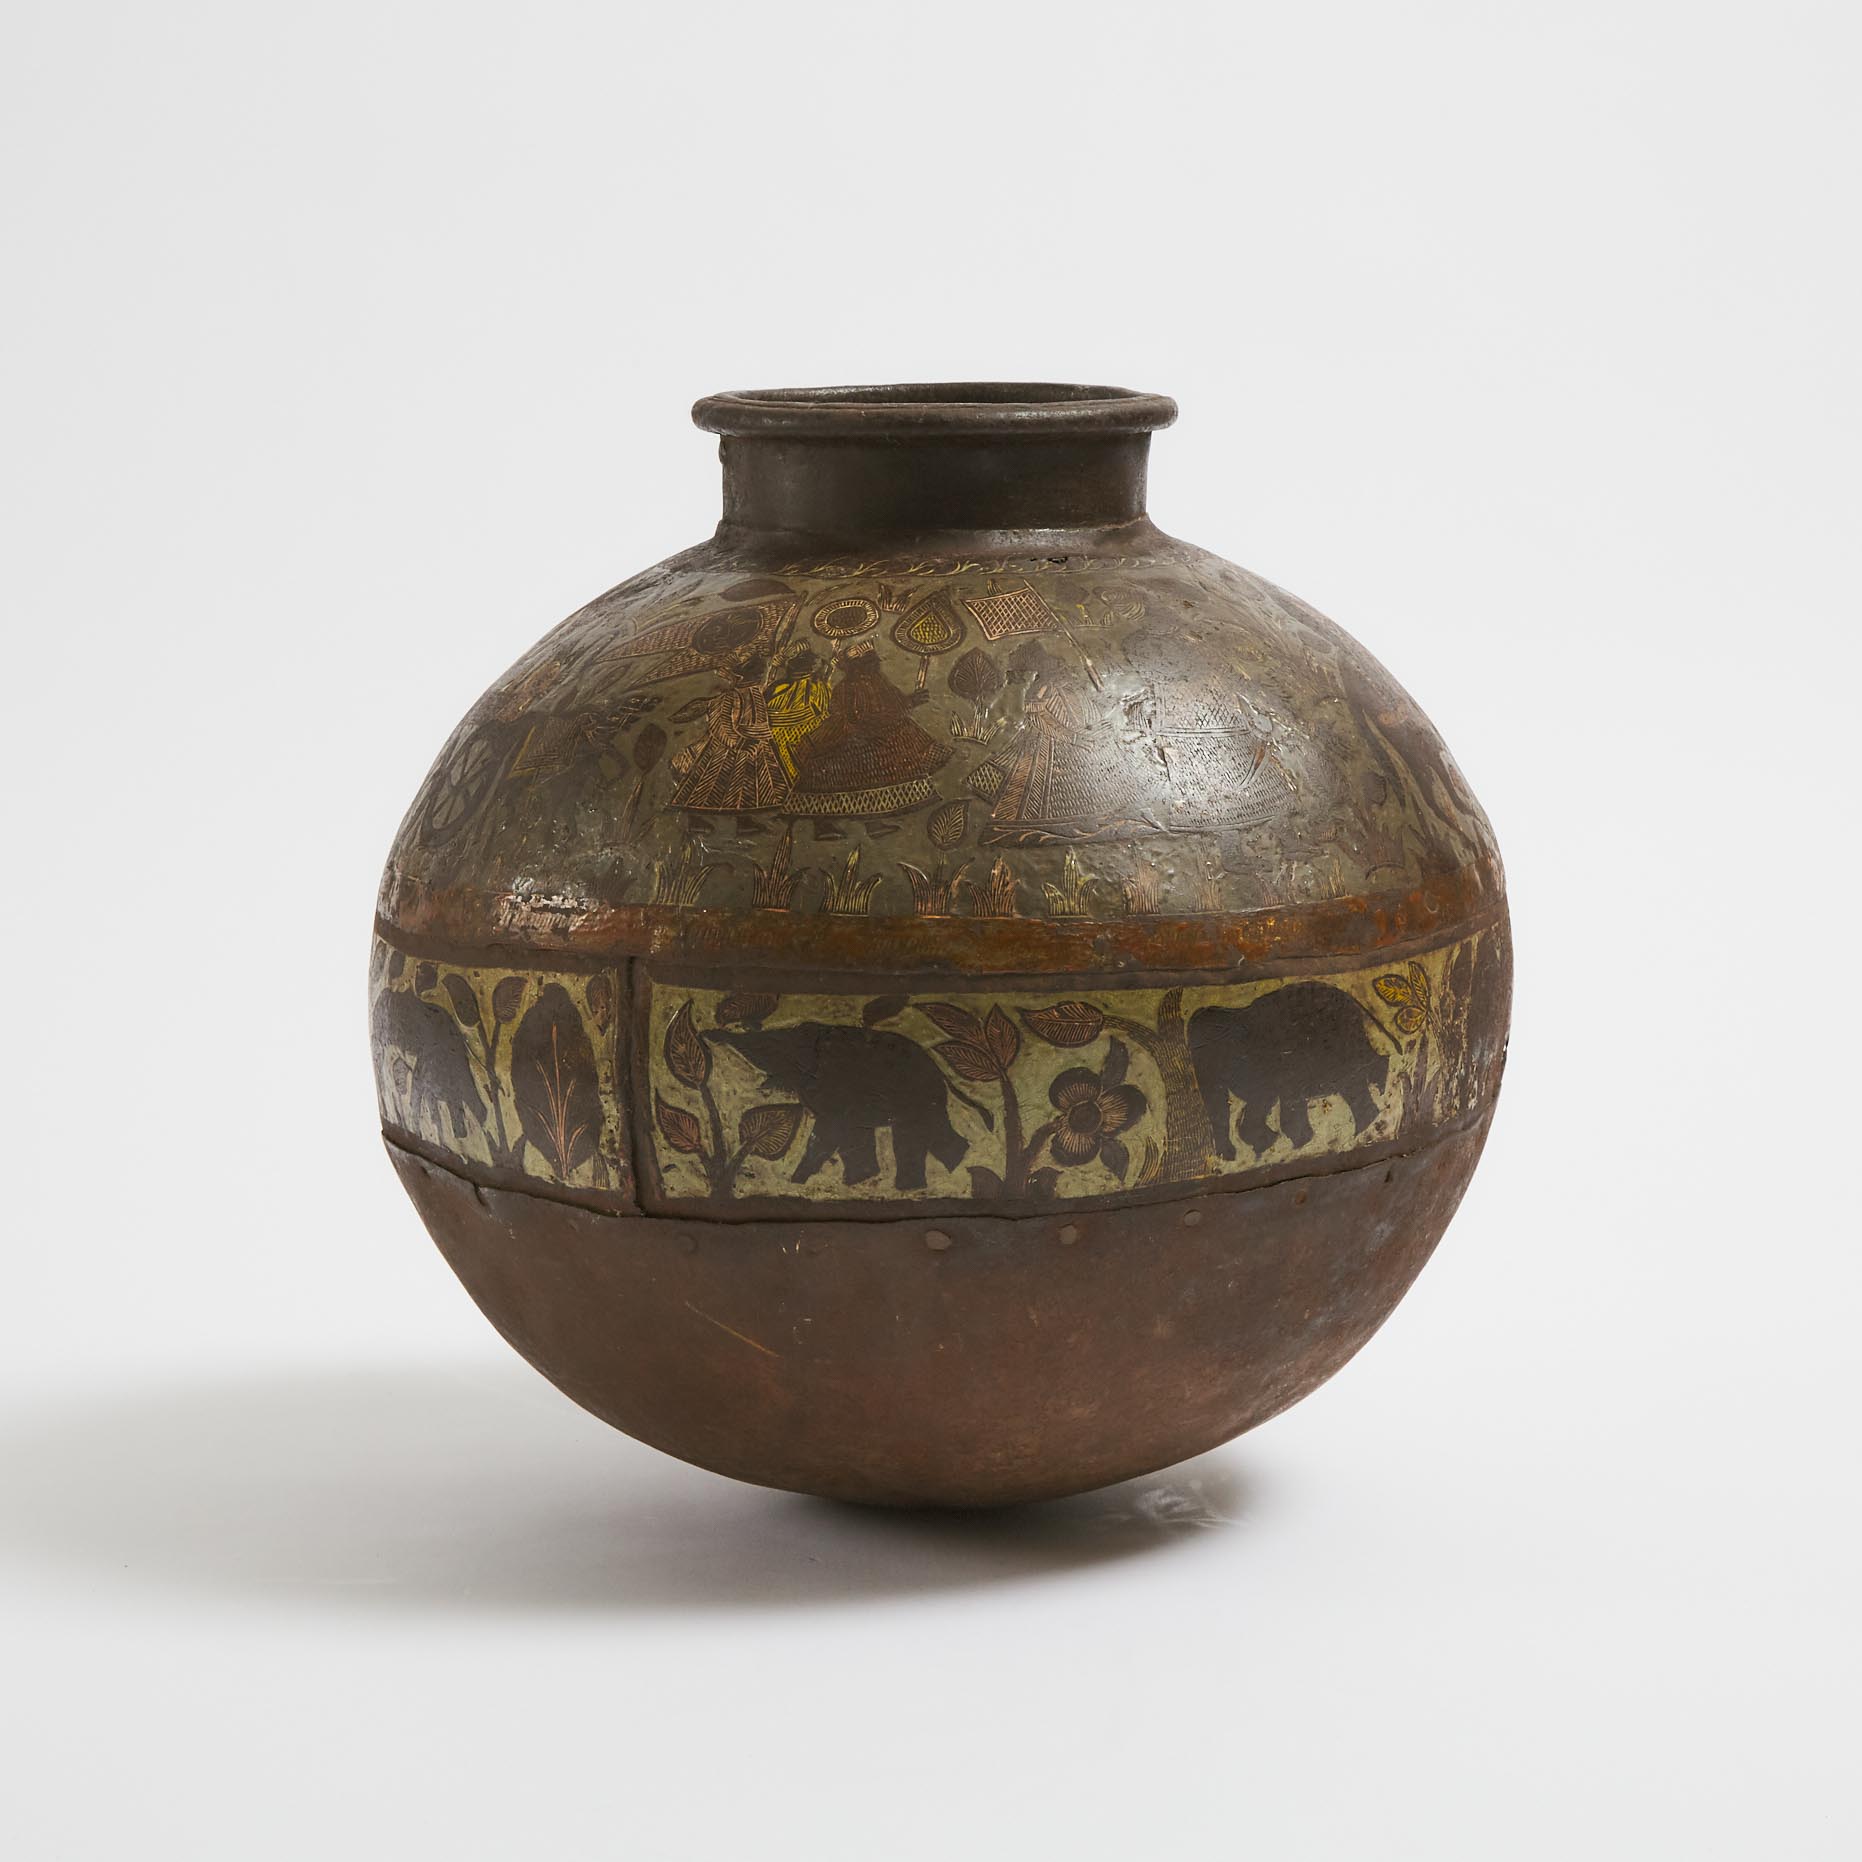 An Indian Silver and Copper Inlaid Iron Water Vase, Lota, 18th/19th Century